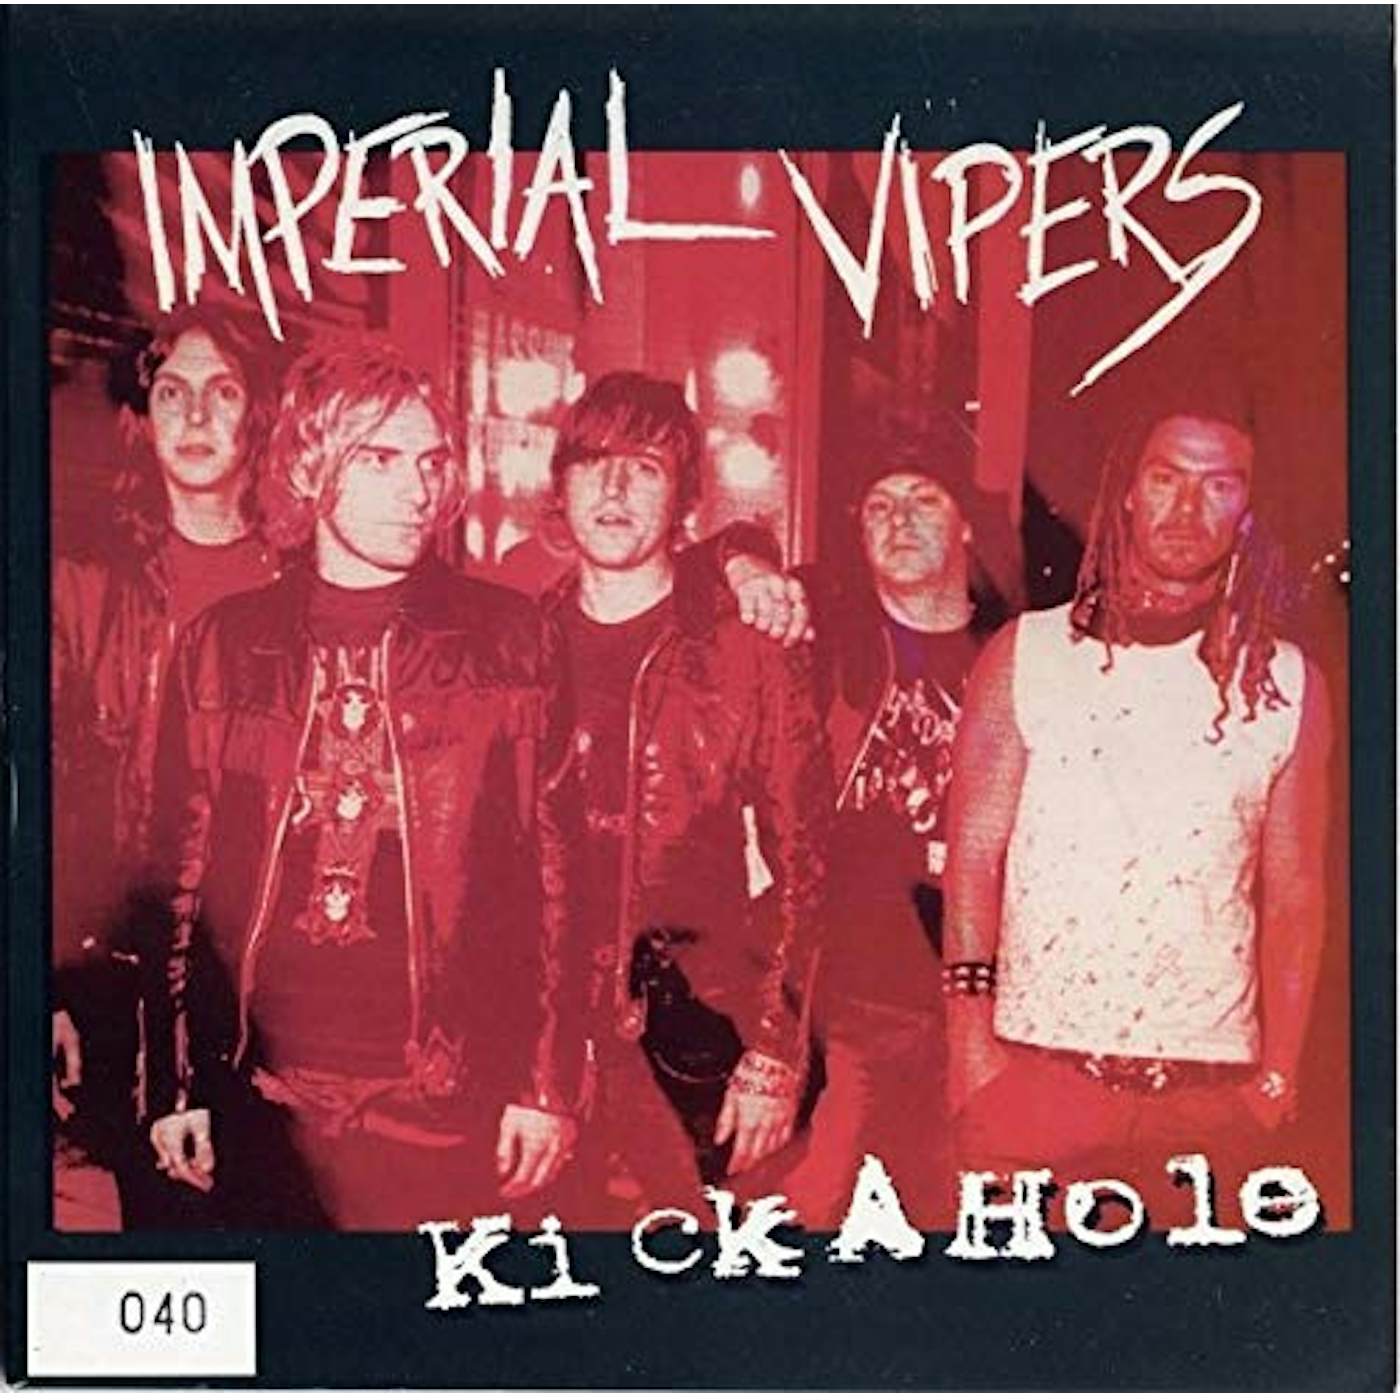 Imperial Vipers CHECK THIS Vinyl Record